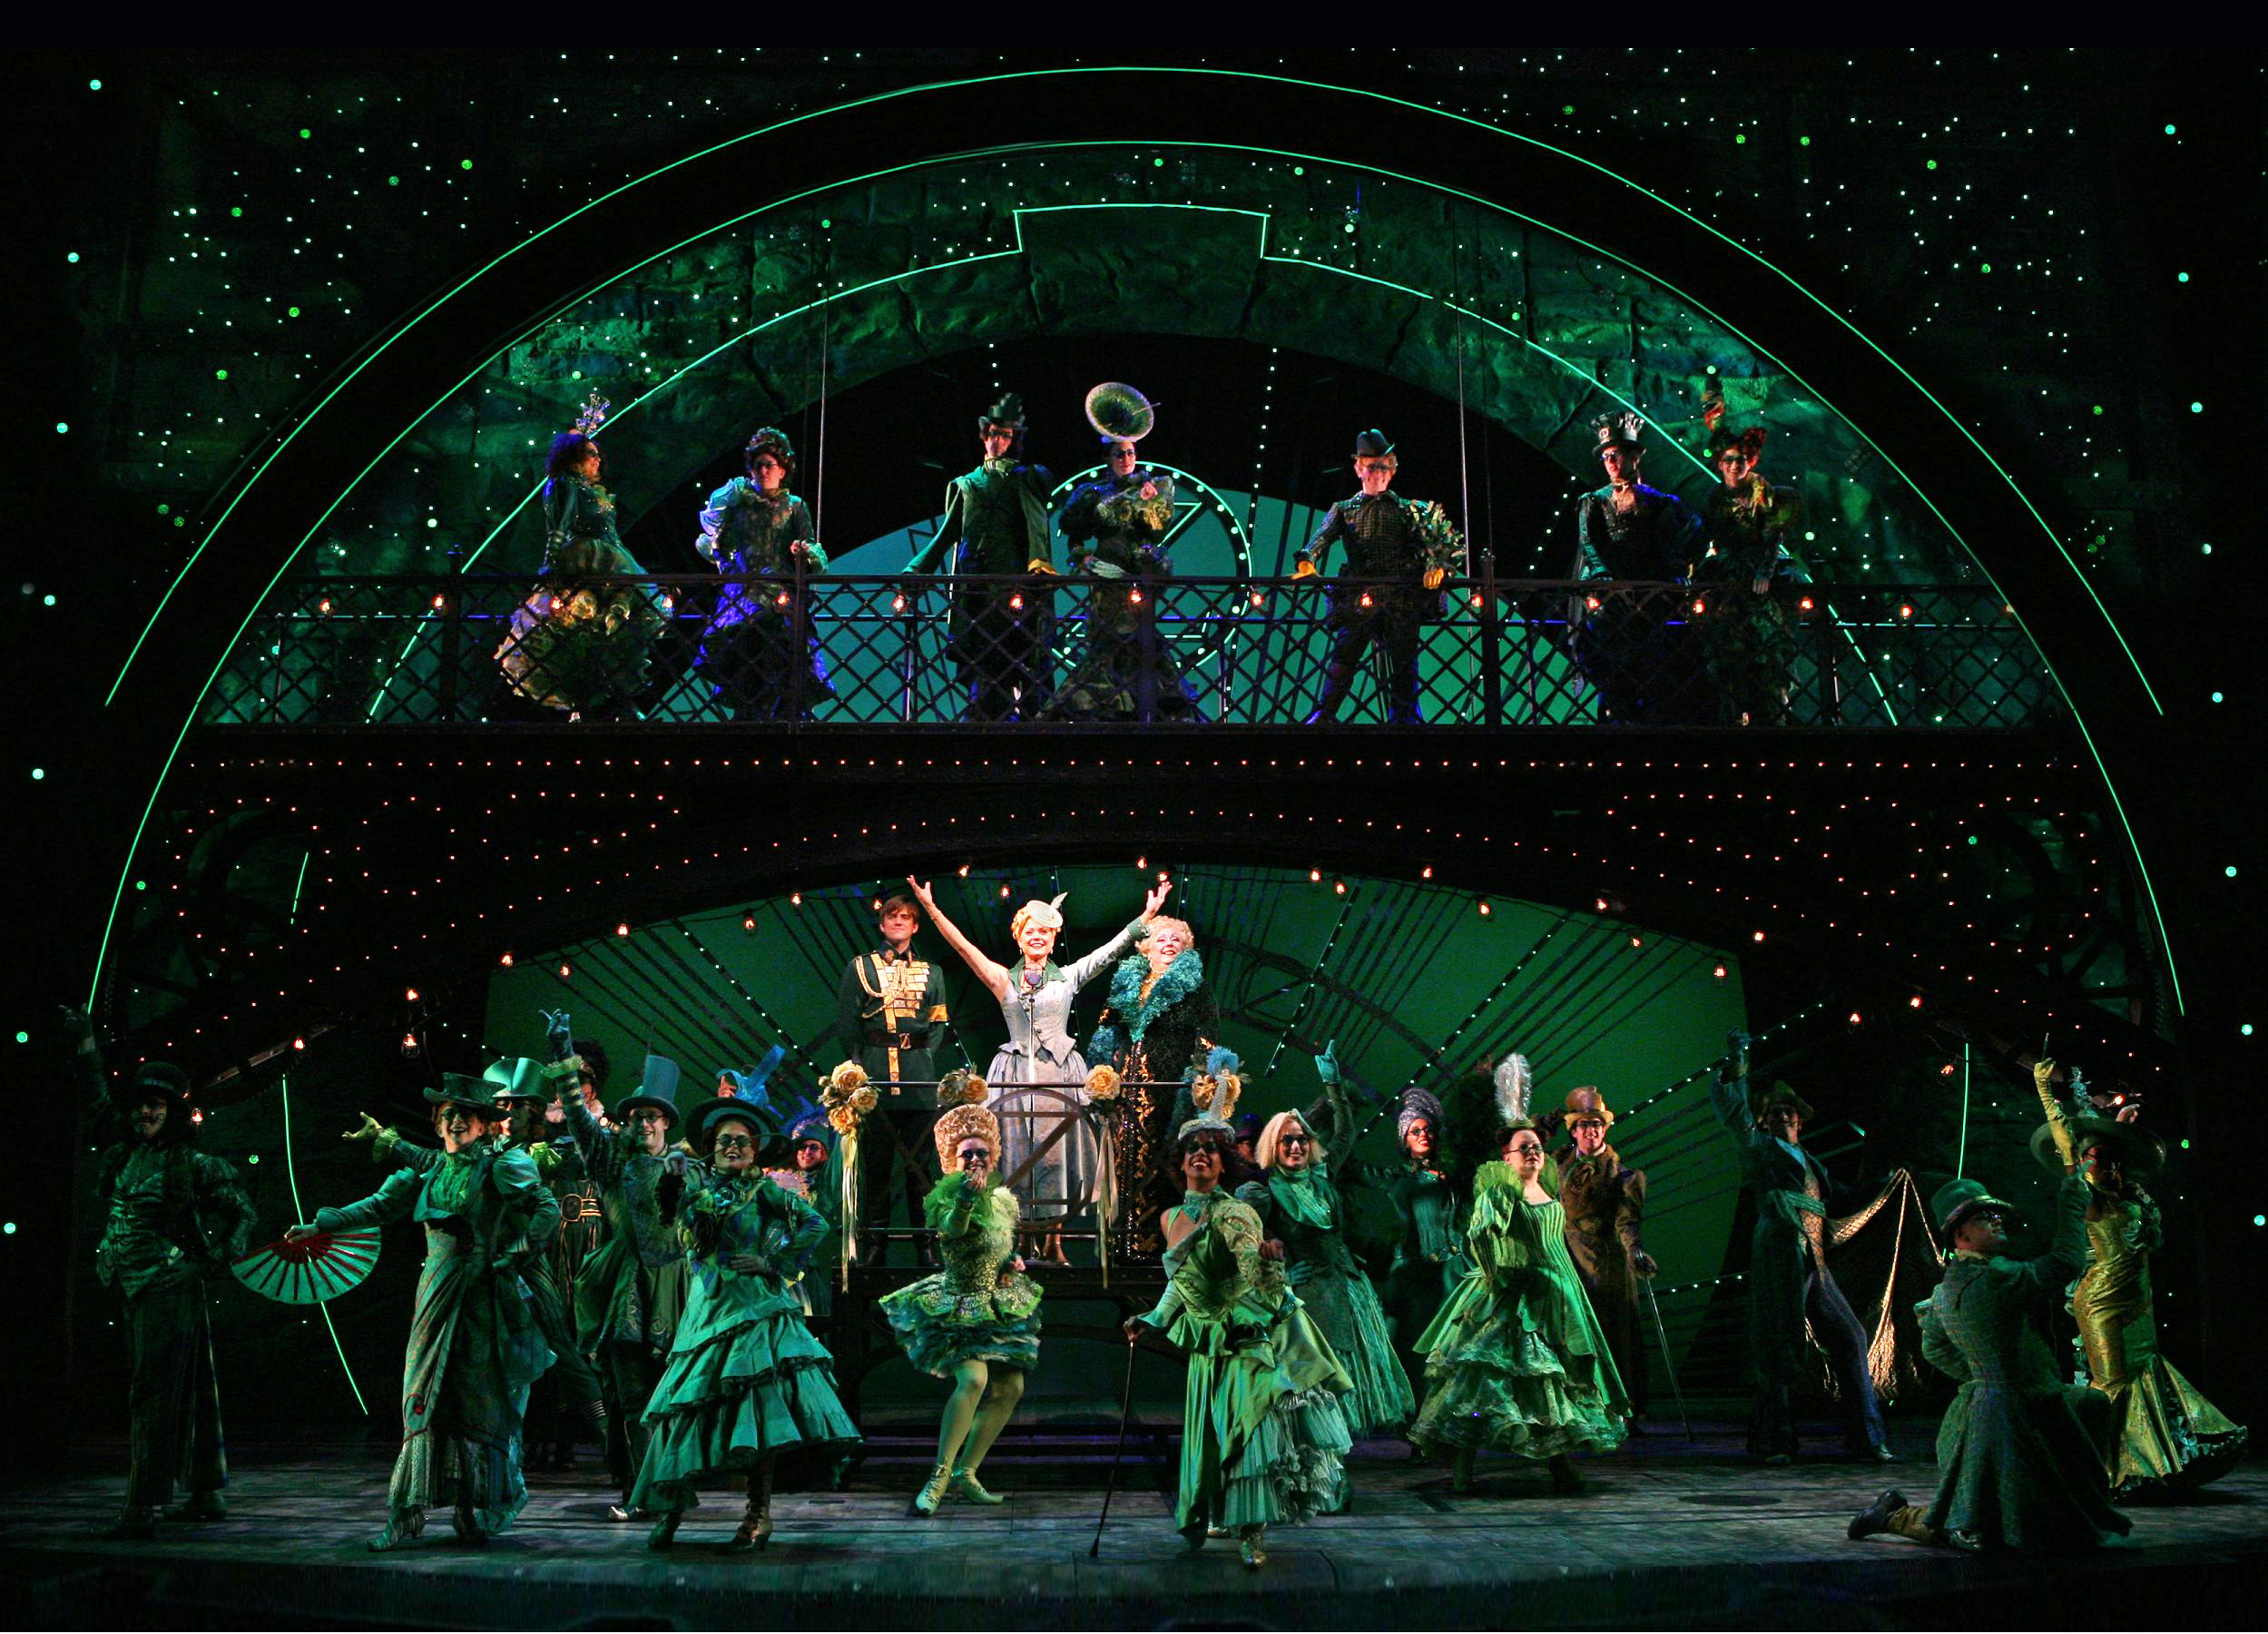 Larkin believes that Wicked has joined the ranks of shows like Les Miserables and The Phantom of the Opera. He performs in eight shows a week at the Gershwin Theatre in New York as the understudy for Boq and as a member of the ensemble. 